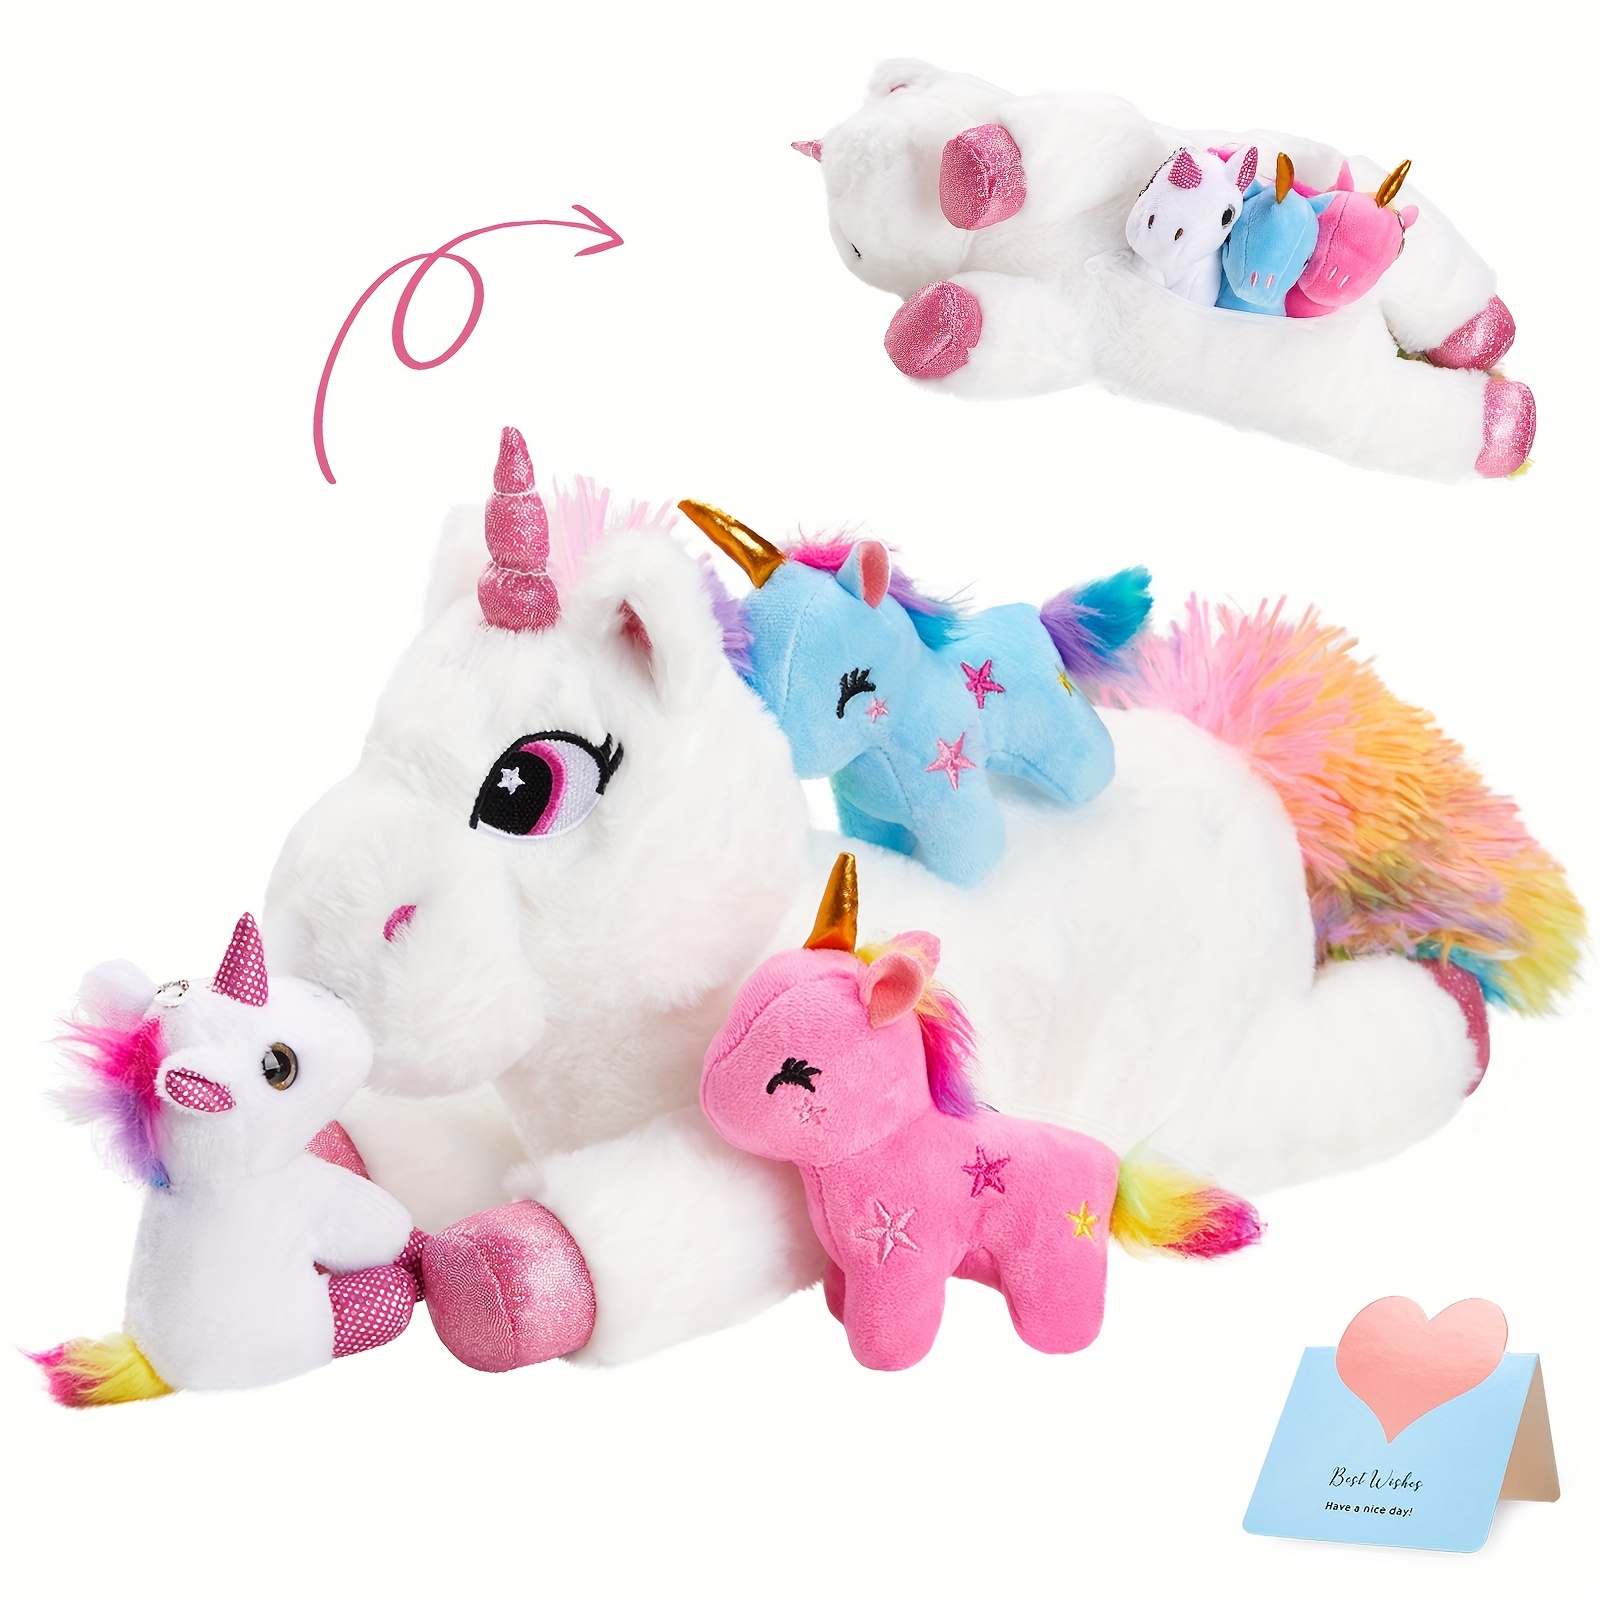 

4pcs 14 Inches/35 Cm, 5 Inches/13 Cm Mother Child Unicorn Stuffed Animal Plush Toys, Realistic, Soft, Loving Mother And 3 Dolls, Playing With Children Gift